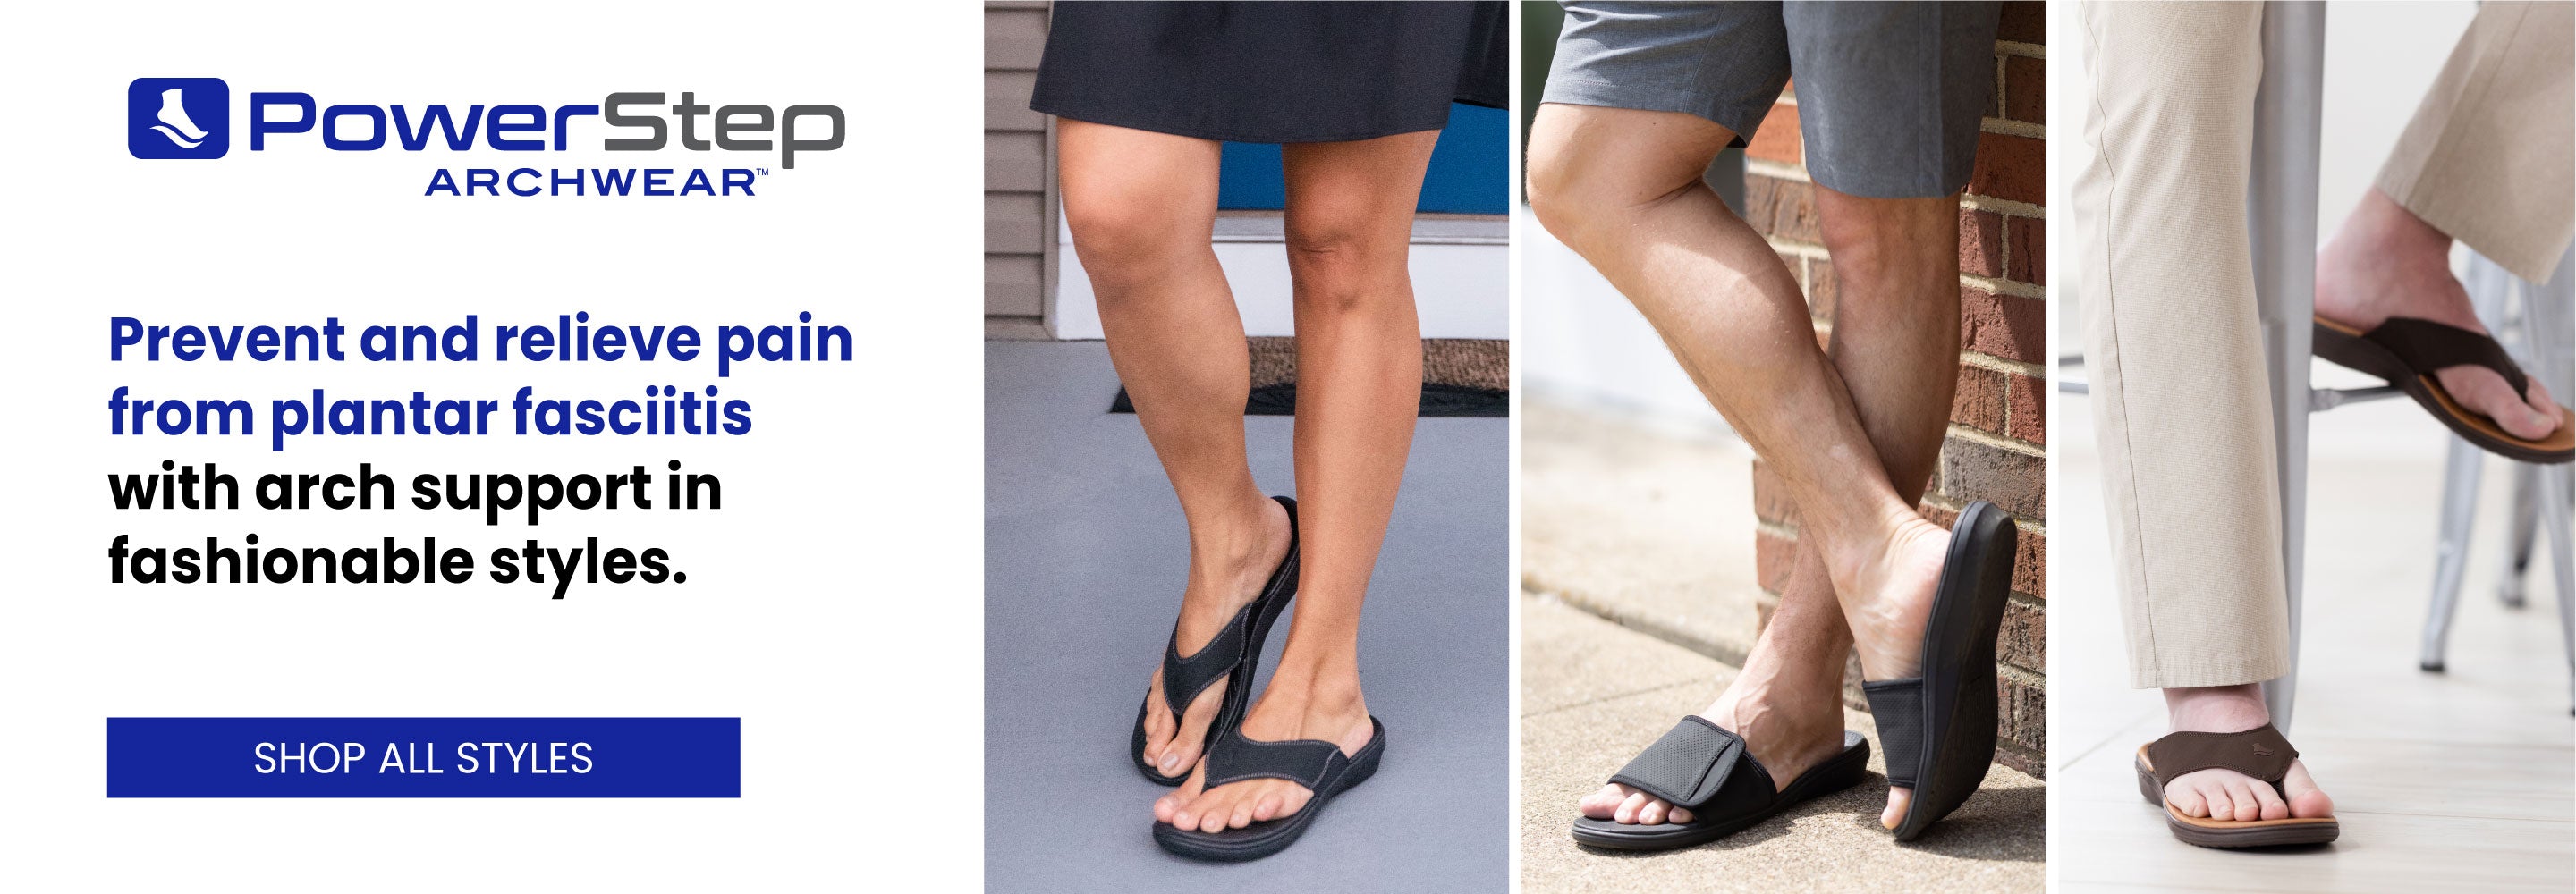 PowerStep ArchWear: Prevent and relieve pain from plantar fasciitis with arch support in fashionable styles. Shop all styles.